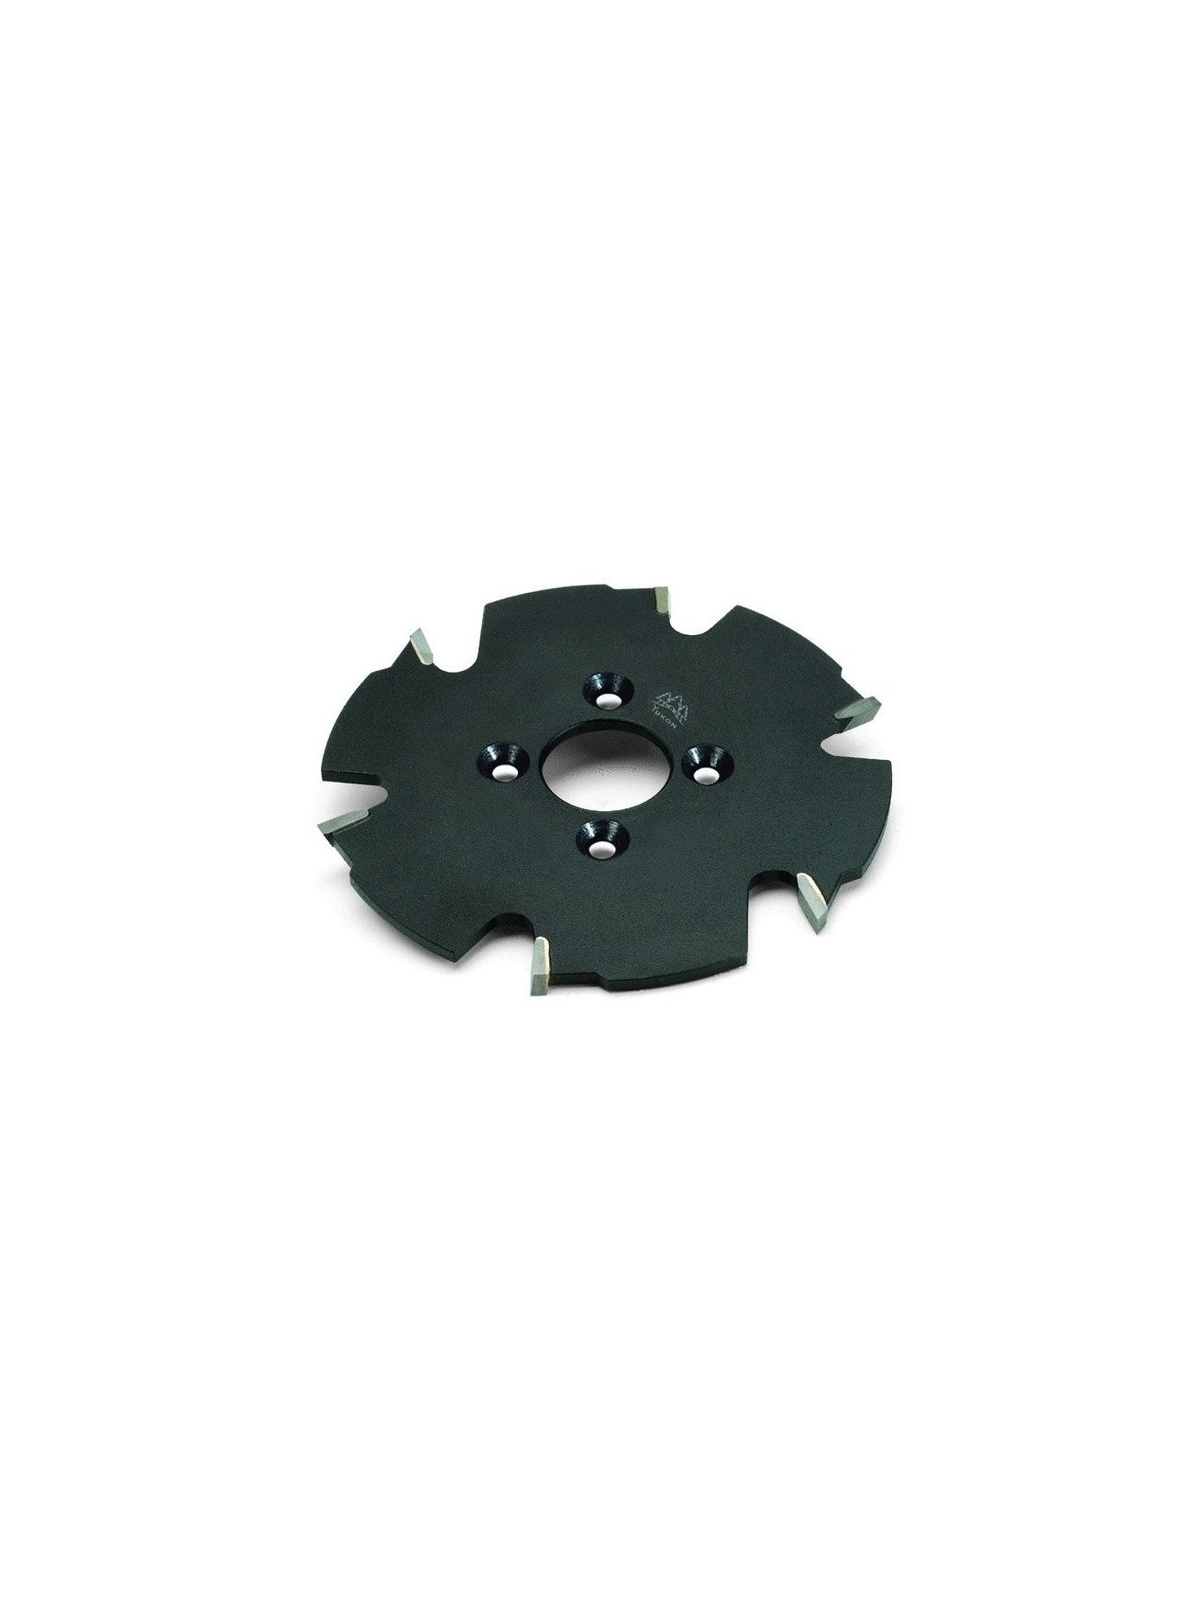 Stark Groove cutter for Biscuit joiners (Lamello) 100 x 22 mm | JVL-Europe